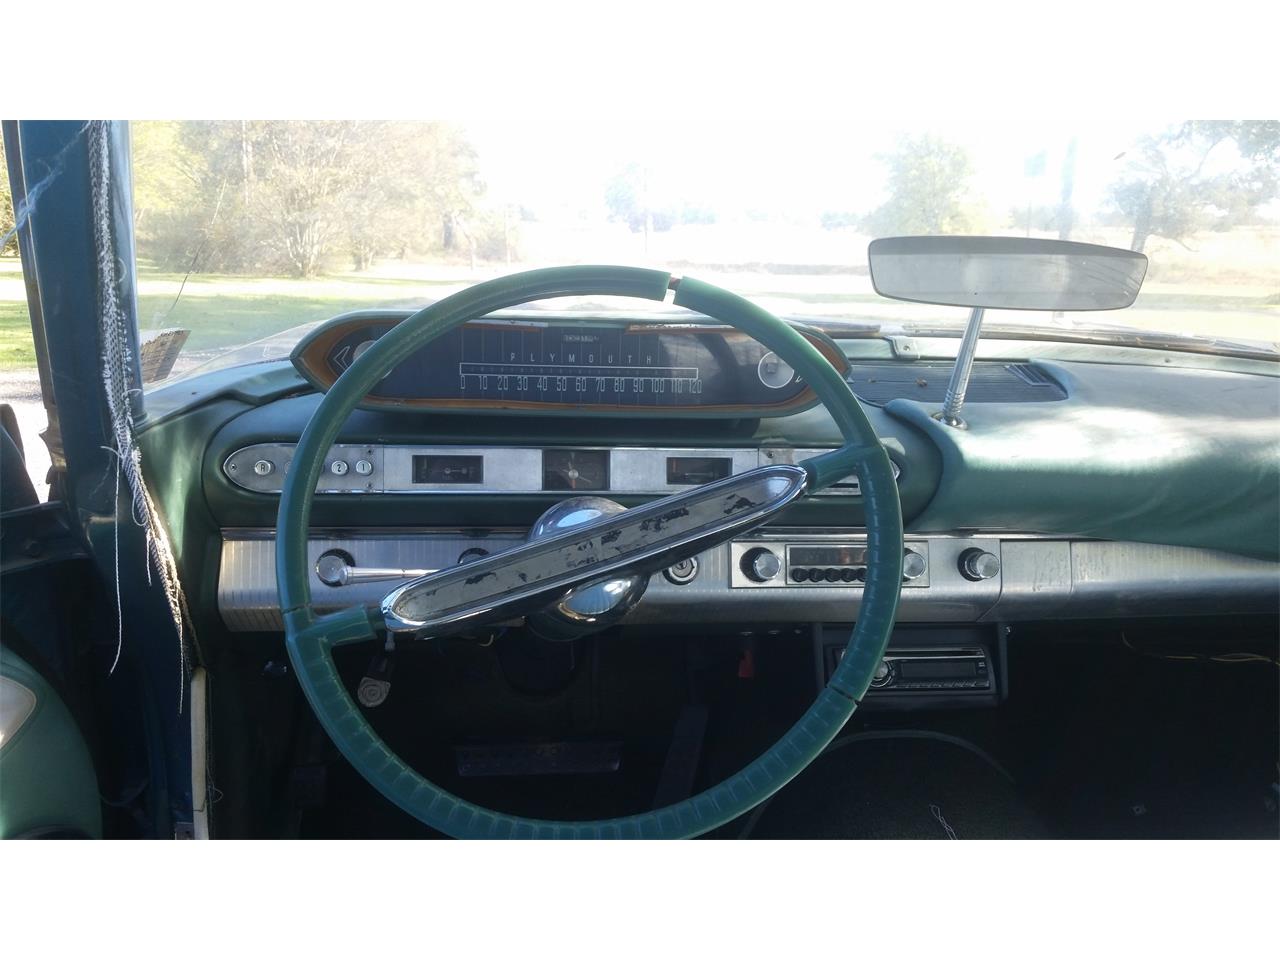 1960 Plymouth Fury For Sale In Canton Tx Classiccarsbay Com